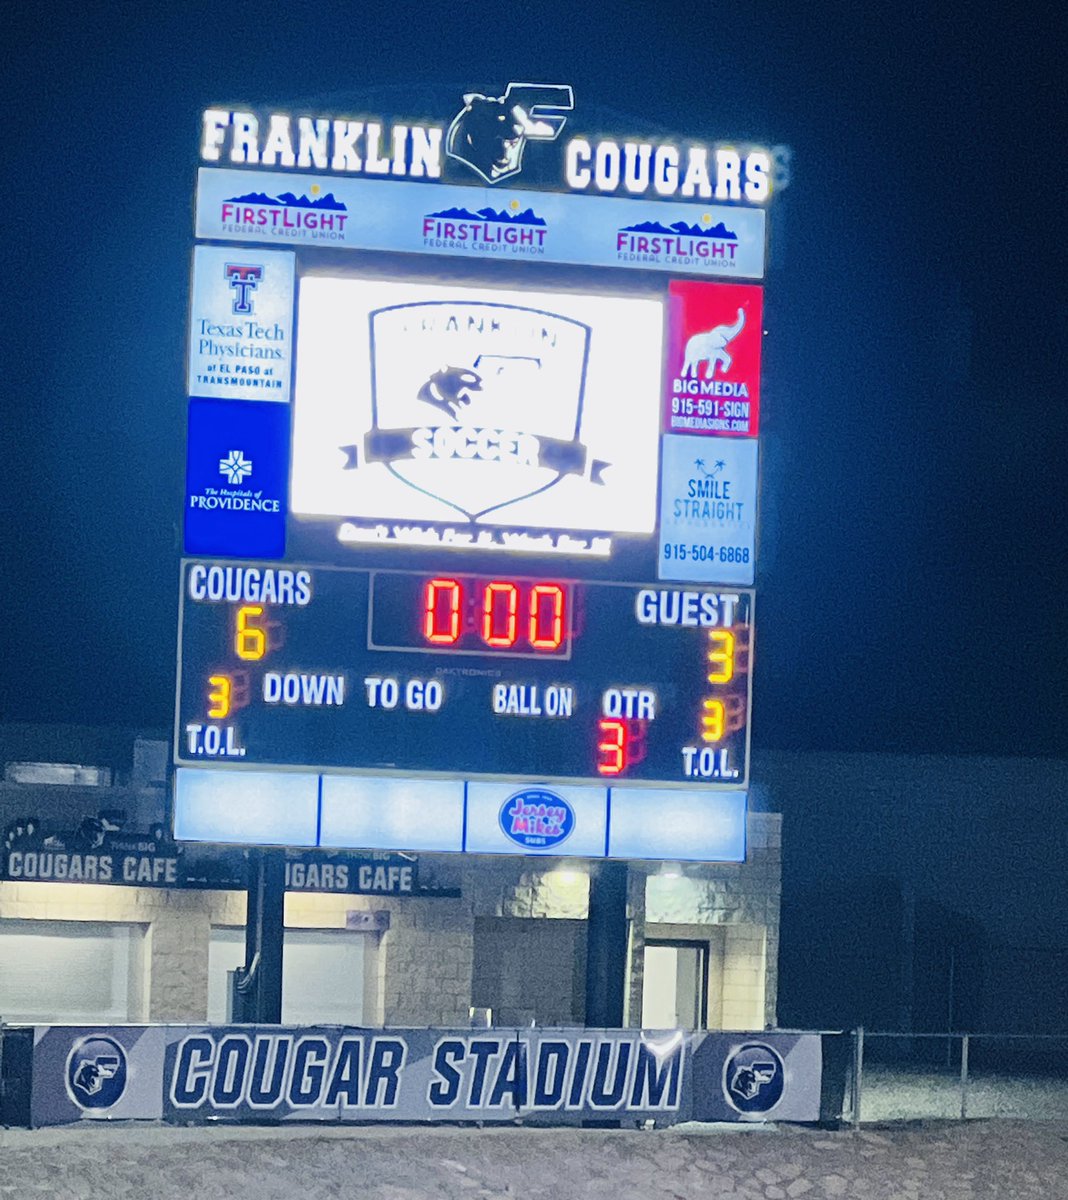 Tonight we showed grit and unity! 
Franklin wins in a dramatic way in PKs! 
#Testofaman 
#WeAreBetterTogether